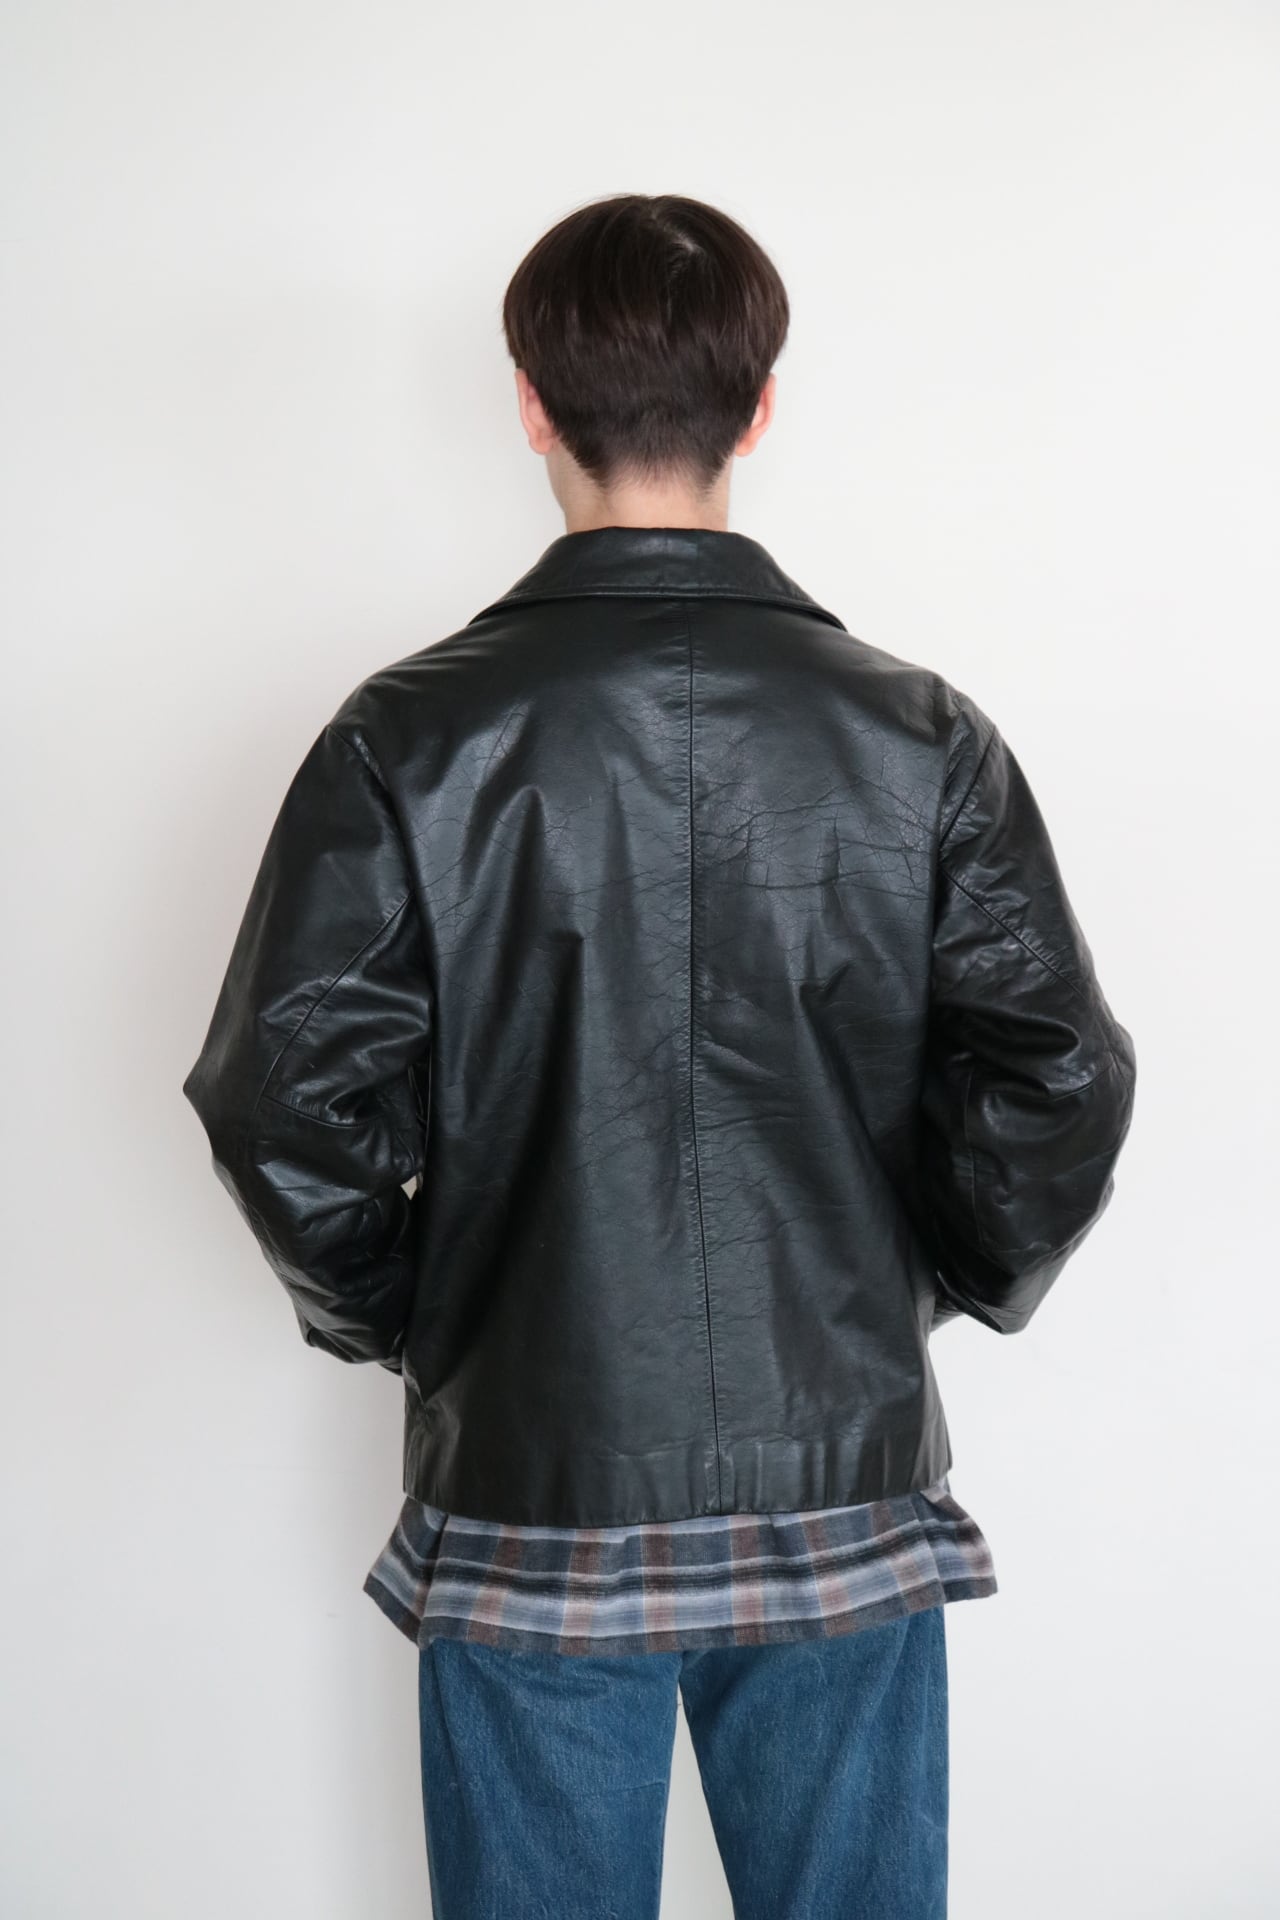 Vintage 90s GAP leather jacket | Cary powered by BASE